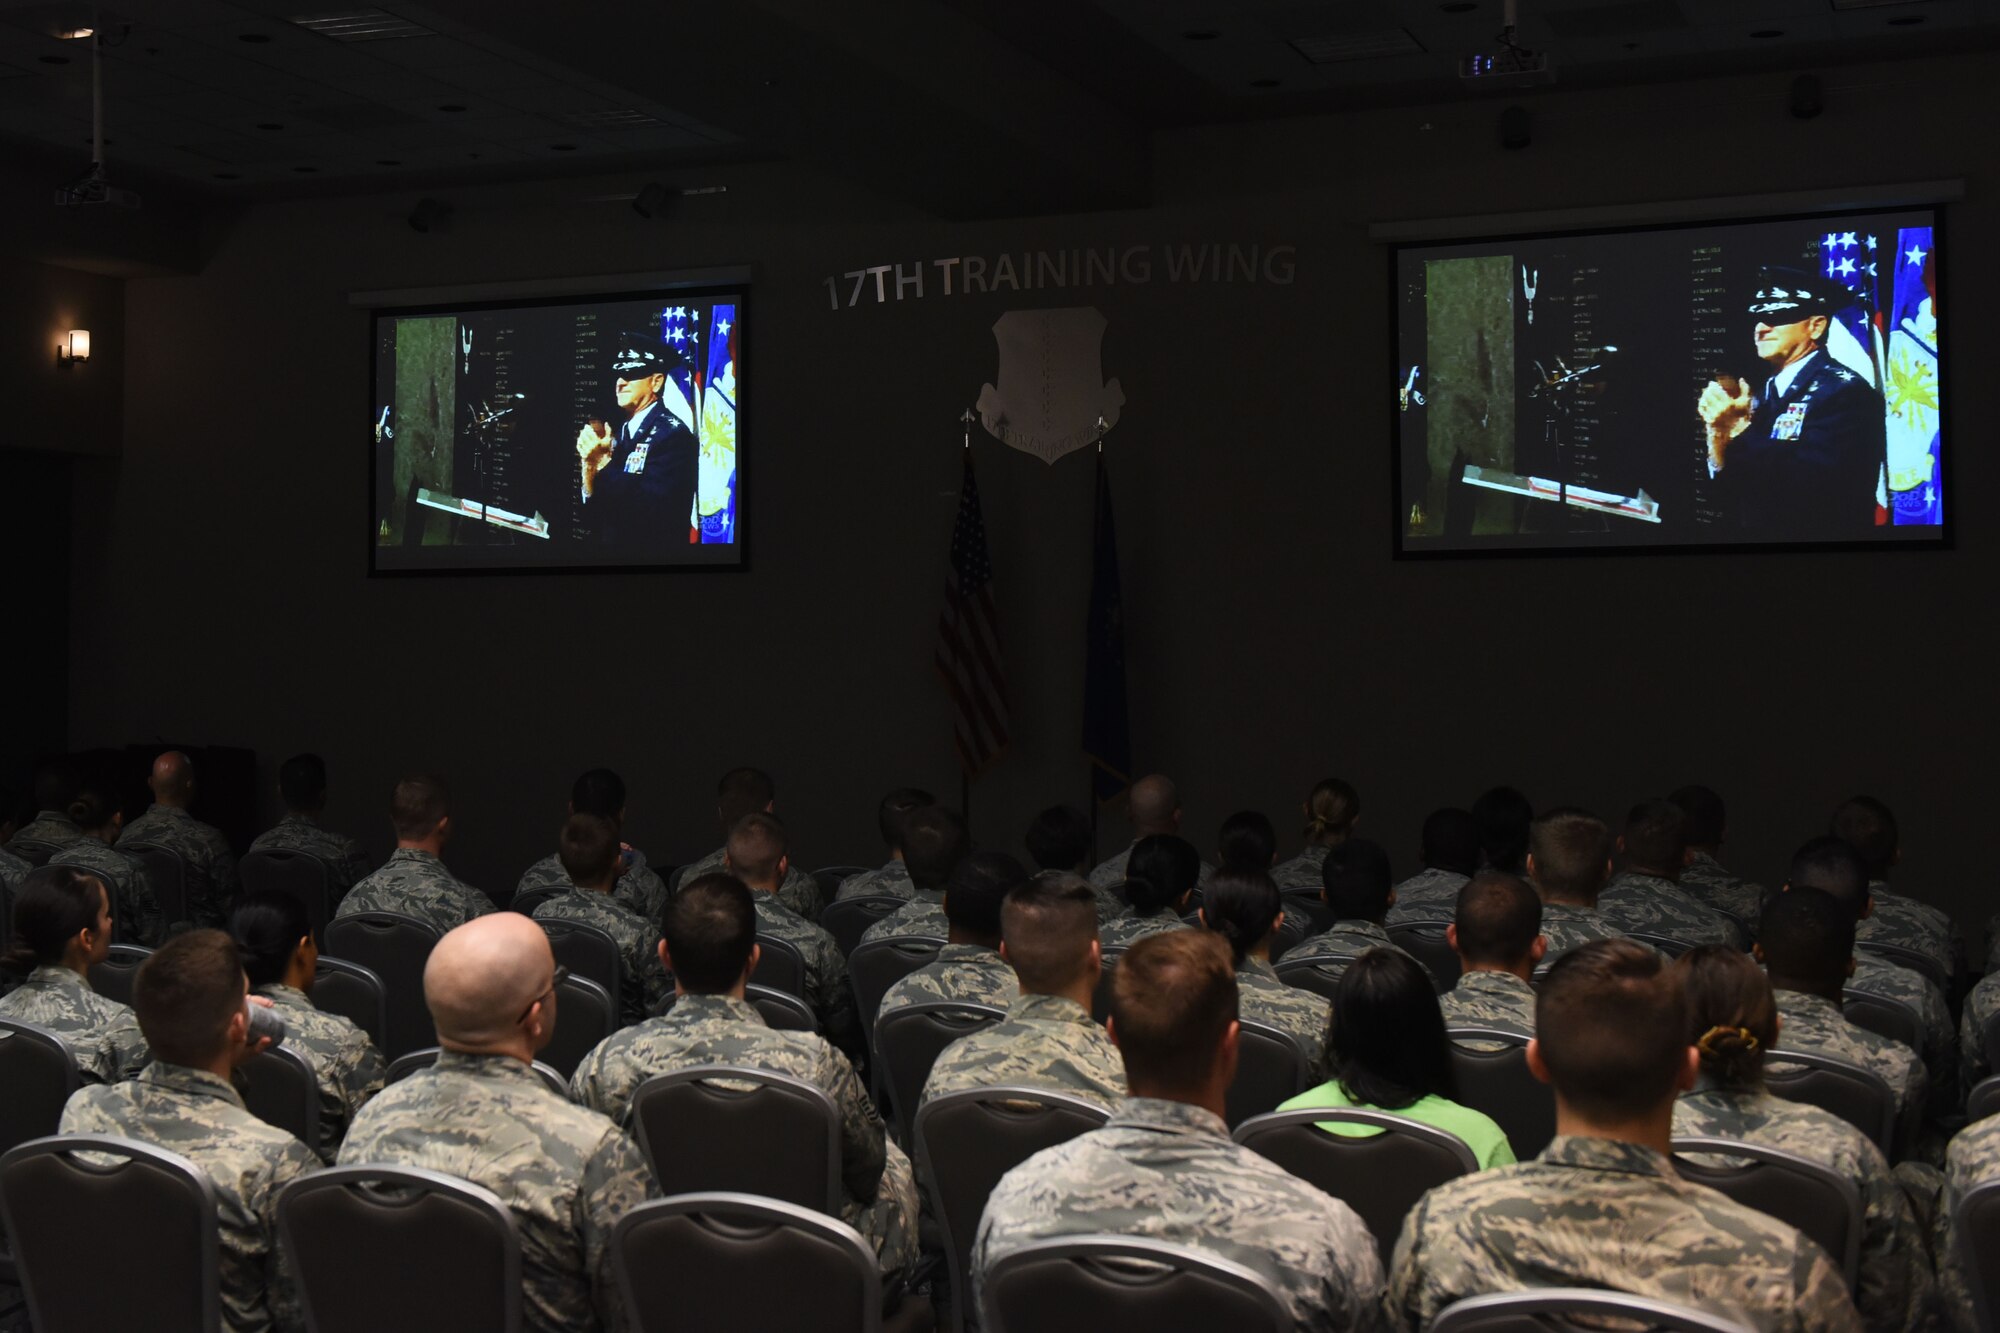 Service members join together to watch the live stream of U.S. Air Force Master Sgt. John Chapman’s Air Force Memorial Medal of Honor Unveiling Ceremony at the Event Center on Goodfellow Air Force Base, Texas, Aug. 24, 2018. Chapman is the first Airman to receive the Medal of Honor since the Vietnam War. (U.S. Air Force photo by Airman 1st Class Zachary Chapman/Released)